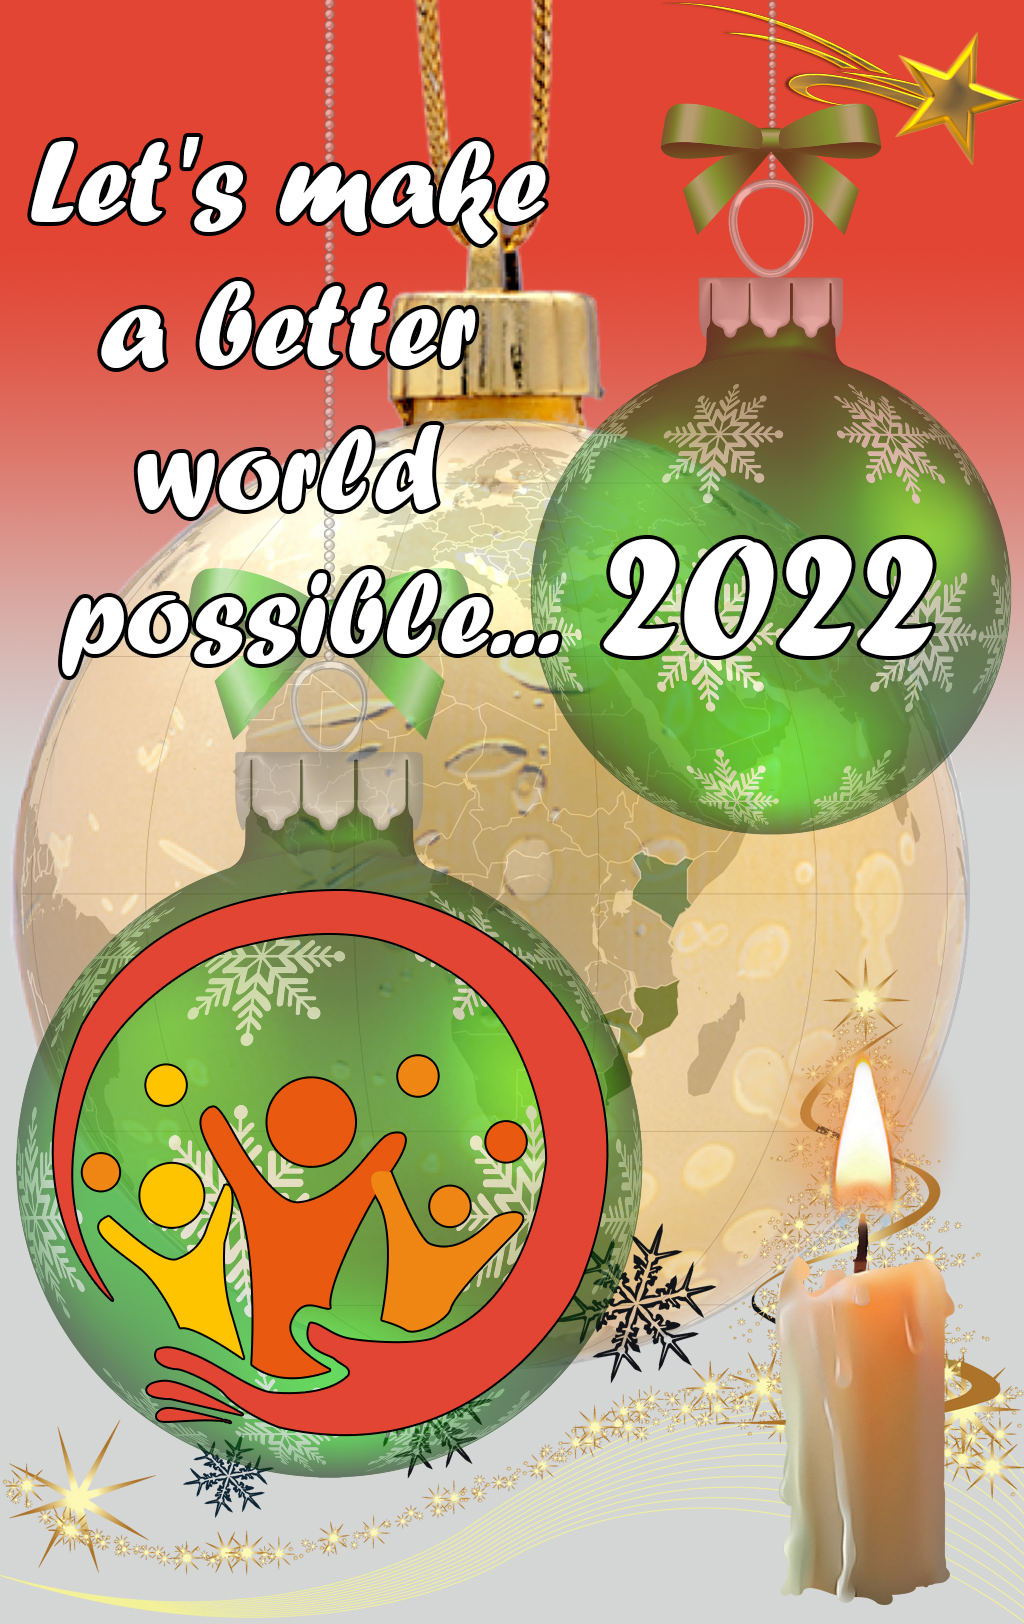 Let's make a better world possible...